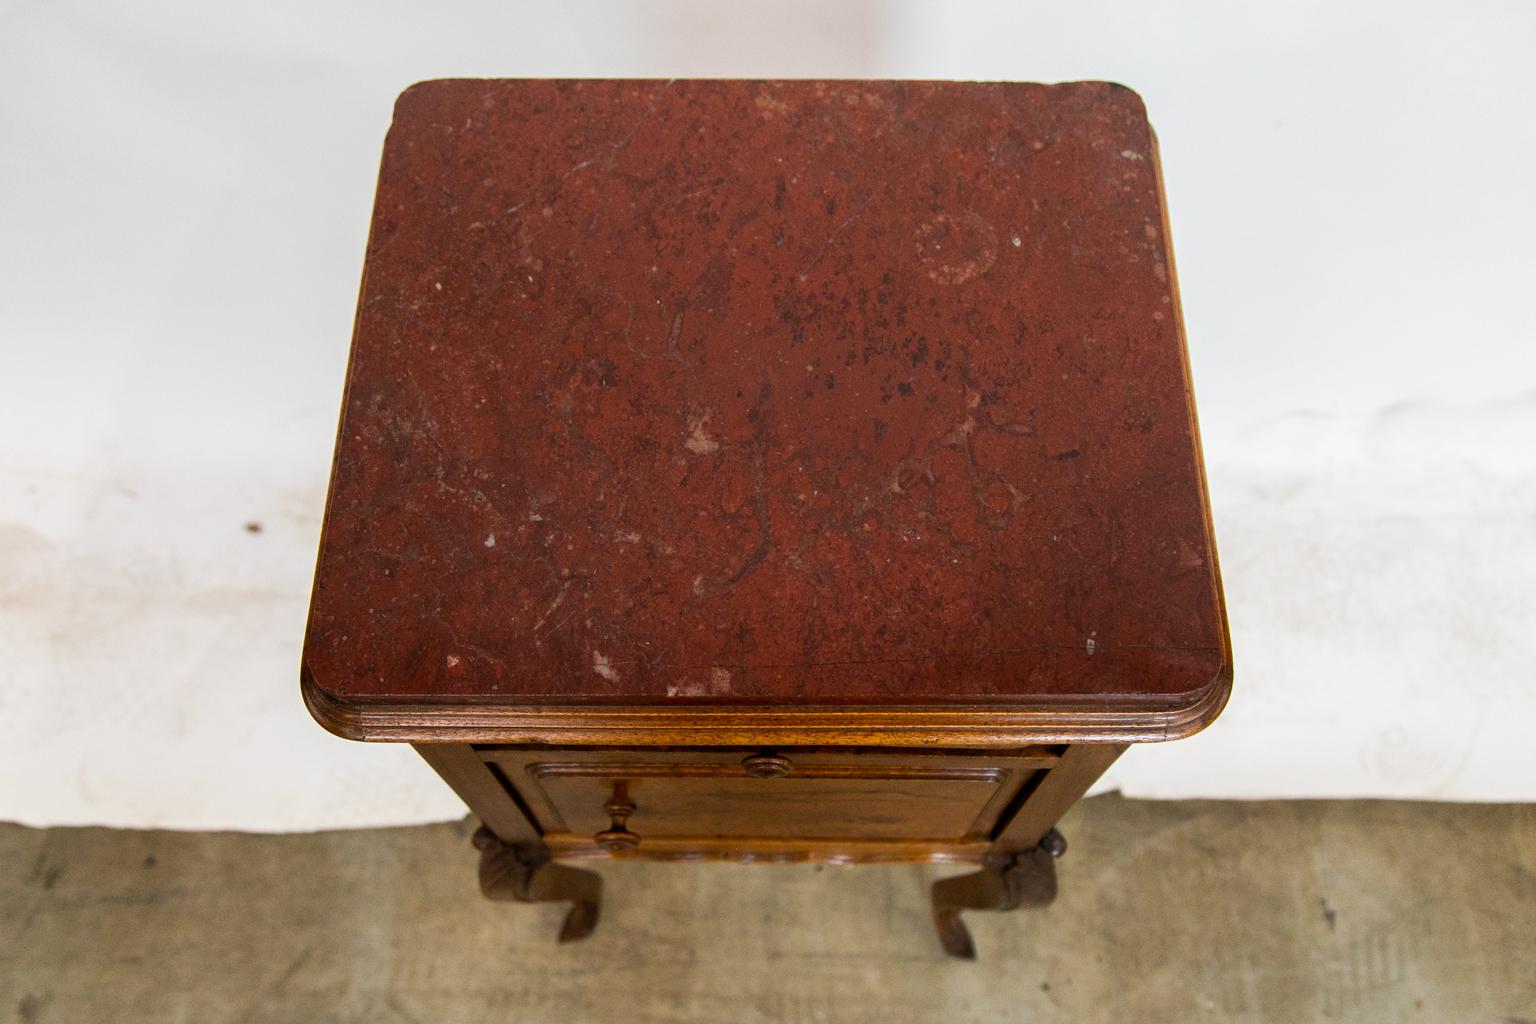 The top of this night stand has shaped molding. The drawer and cupboard door both have shaped raised panels and the original turned knobs. The lower apron has shaped carved molding which extends down the legs to the feet on all four legs. The knees